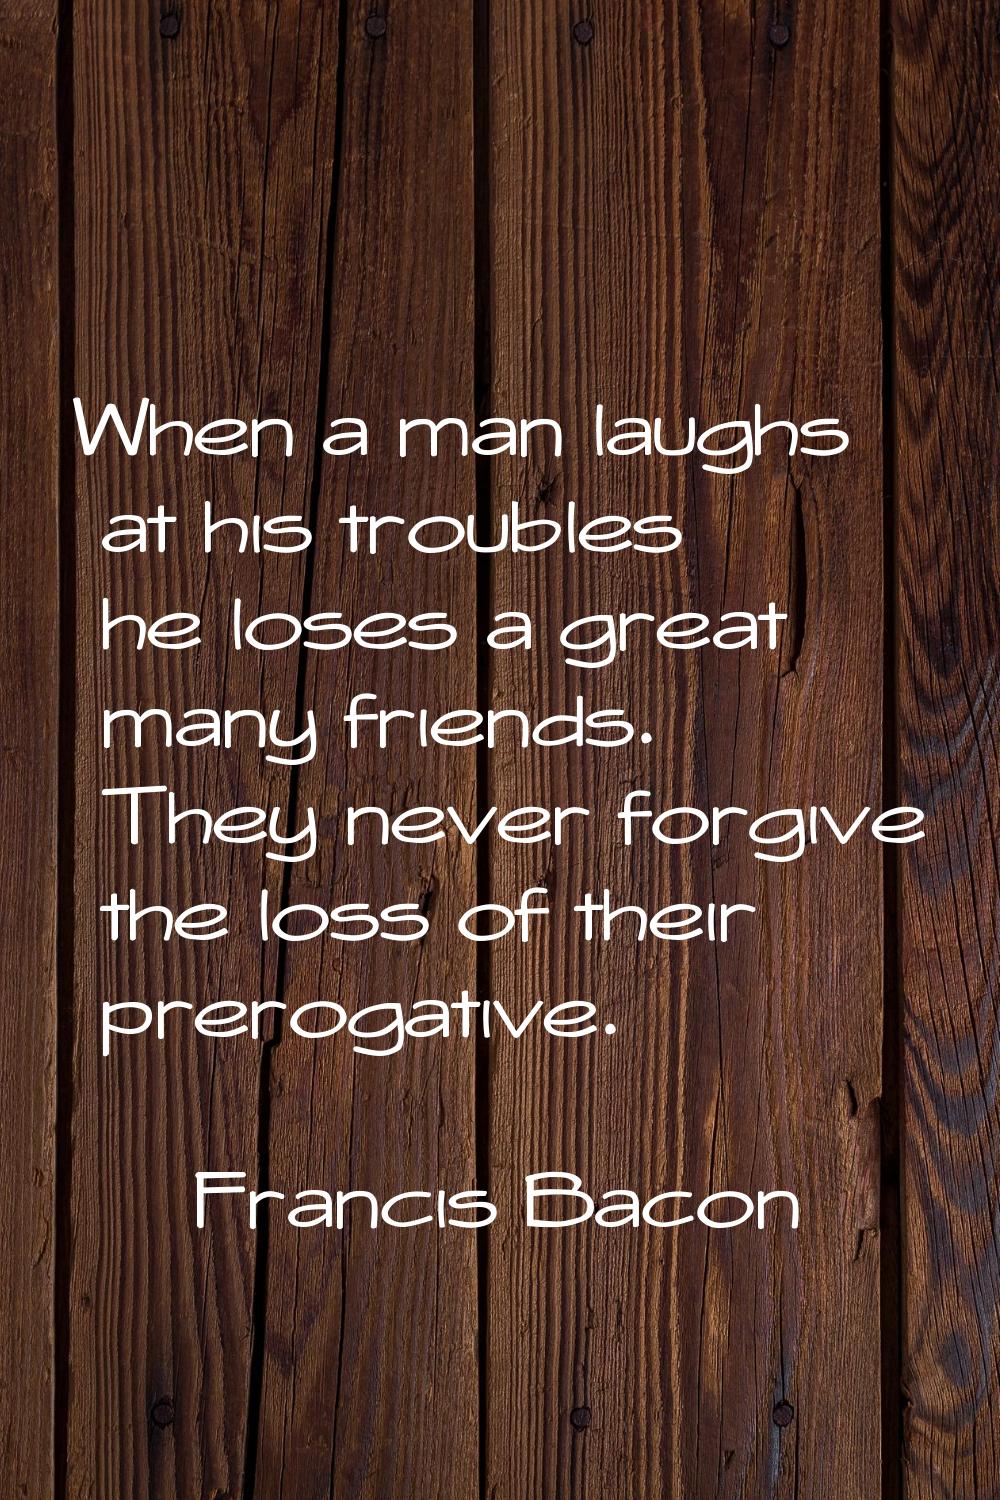 When a man laughs at his troubles he loses a great many friends. They never forgive the loss of the